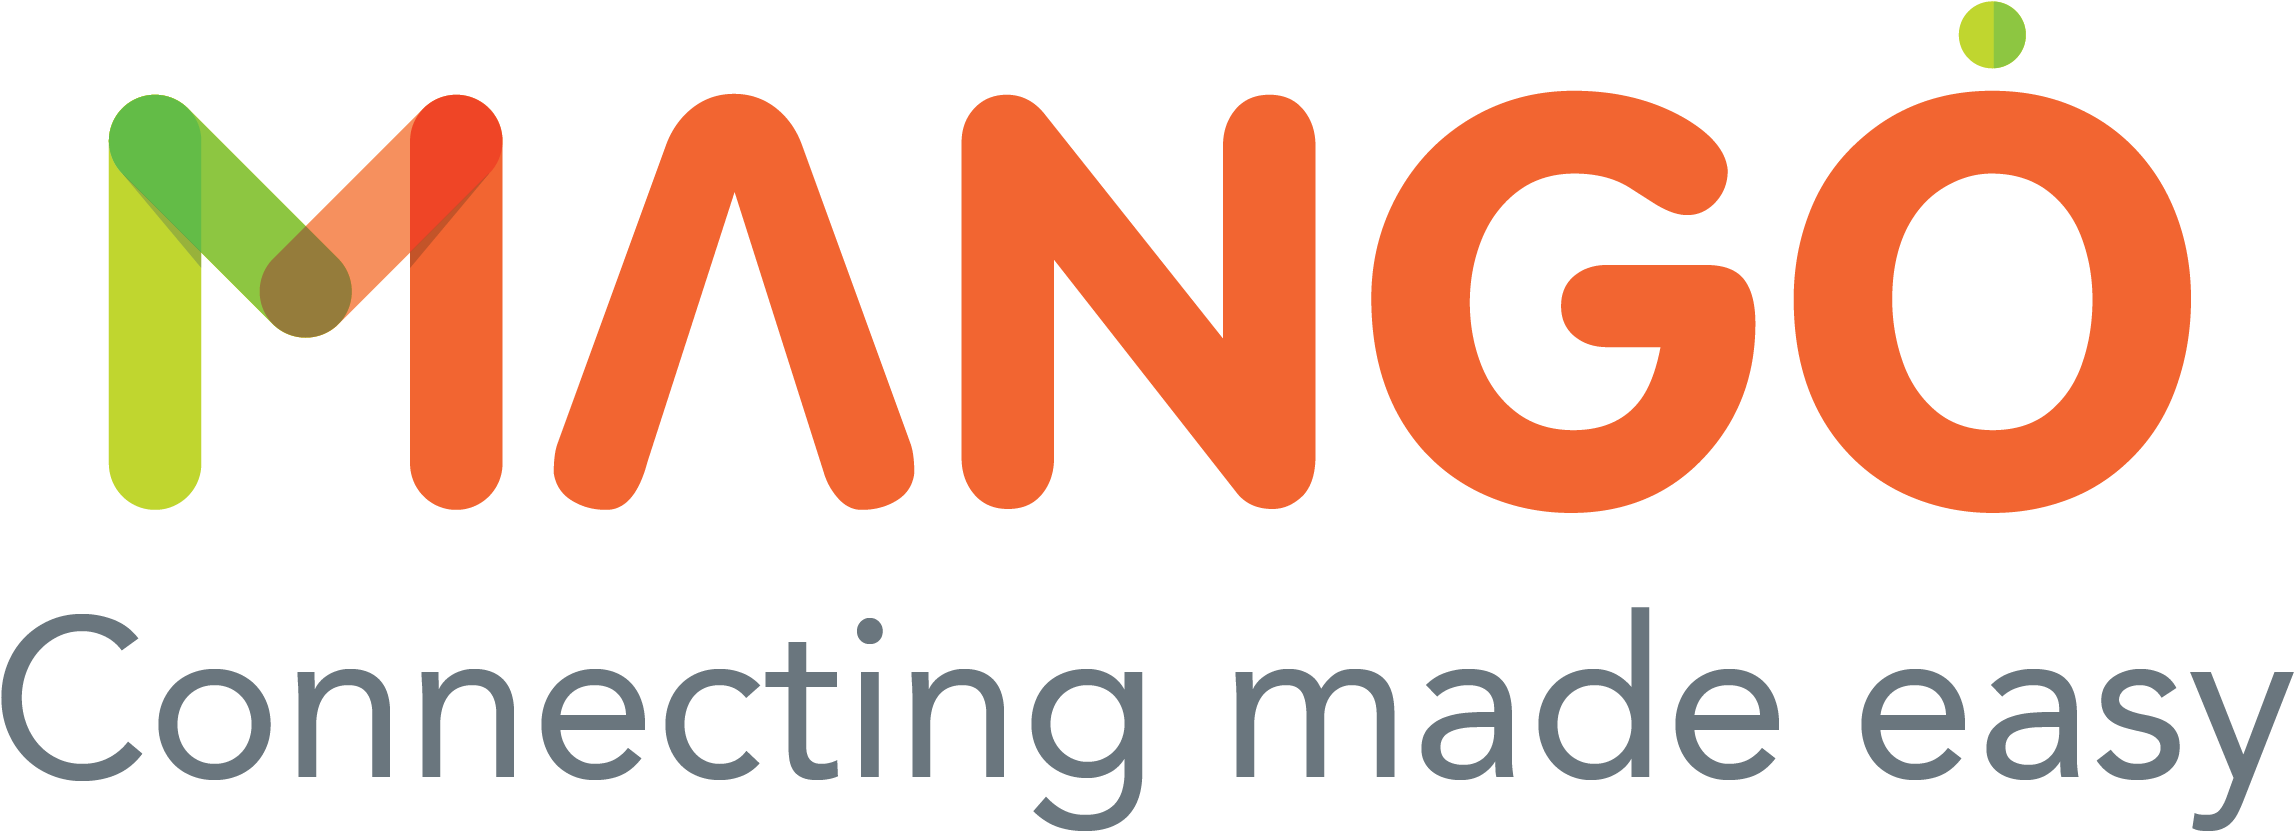 Mango Networking - Mango Connects (3058x1038), Png Download